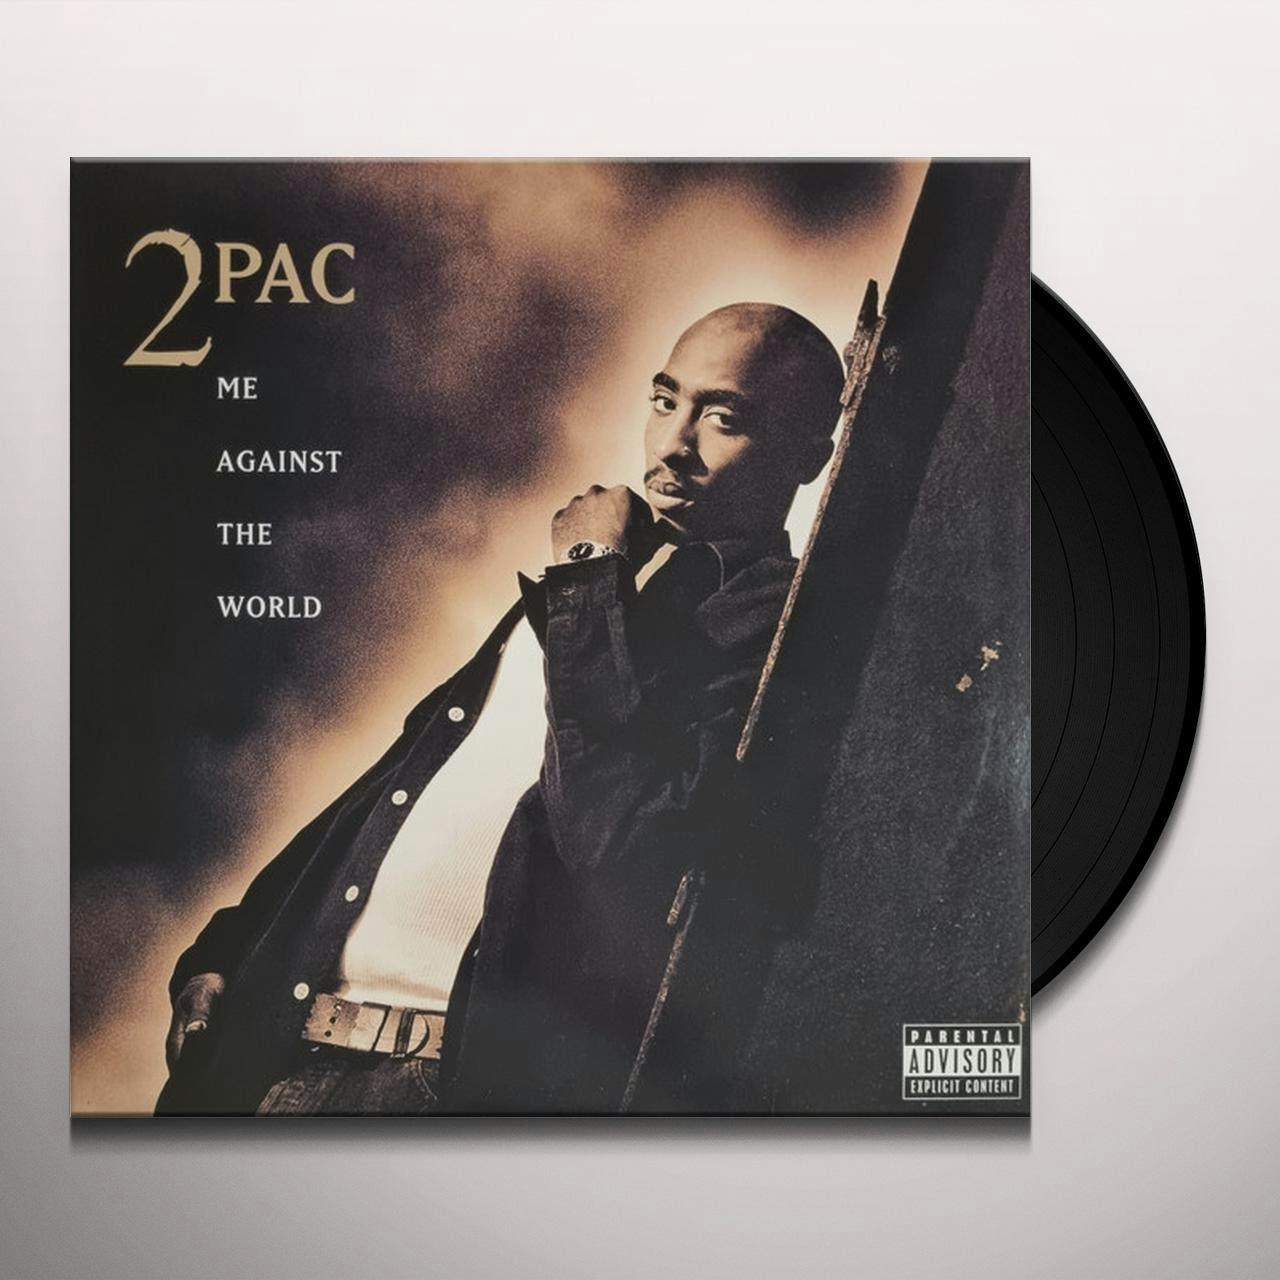 2pac me against the world album cover